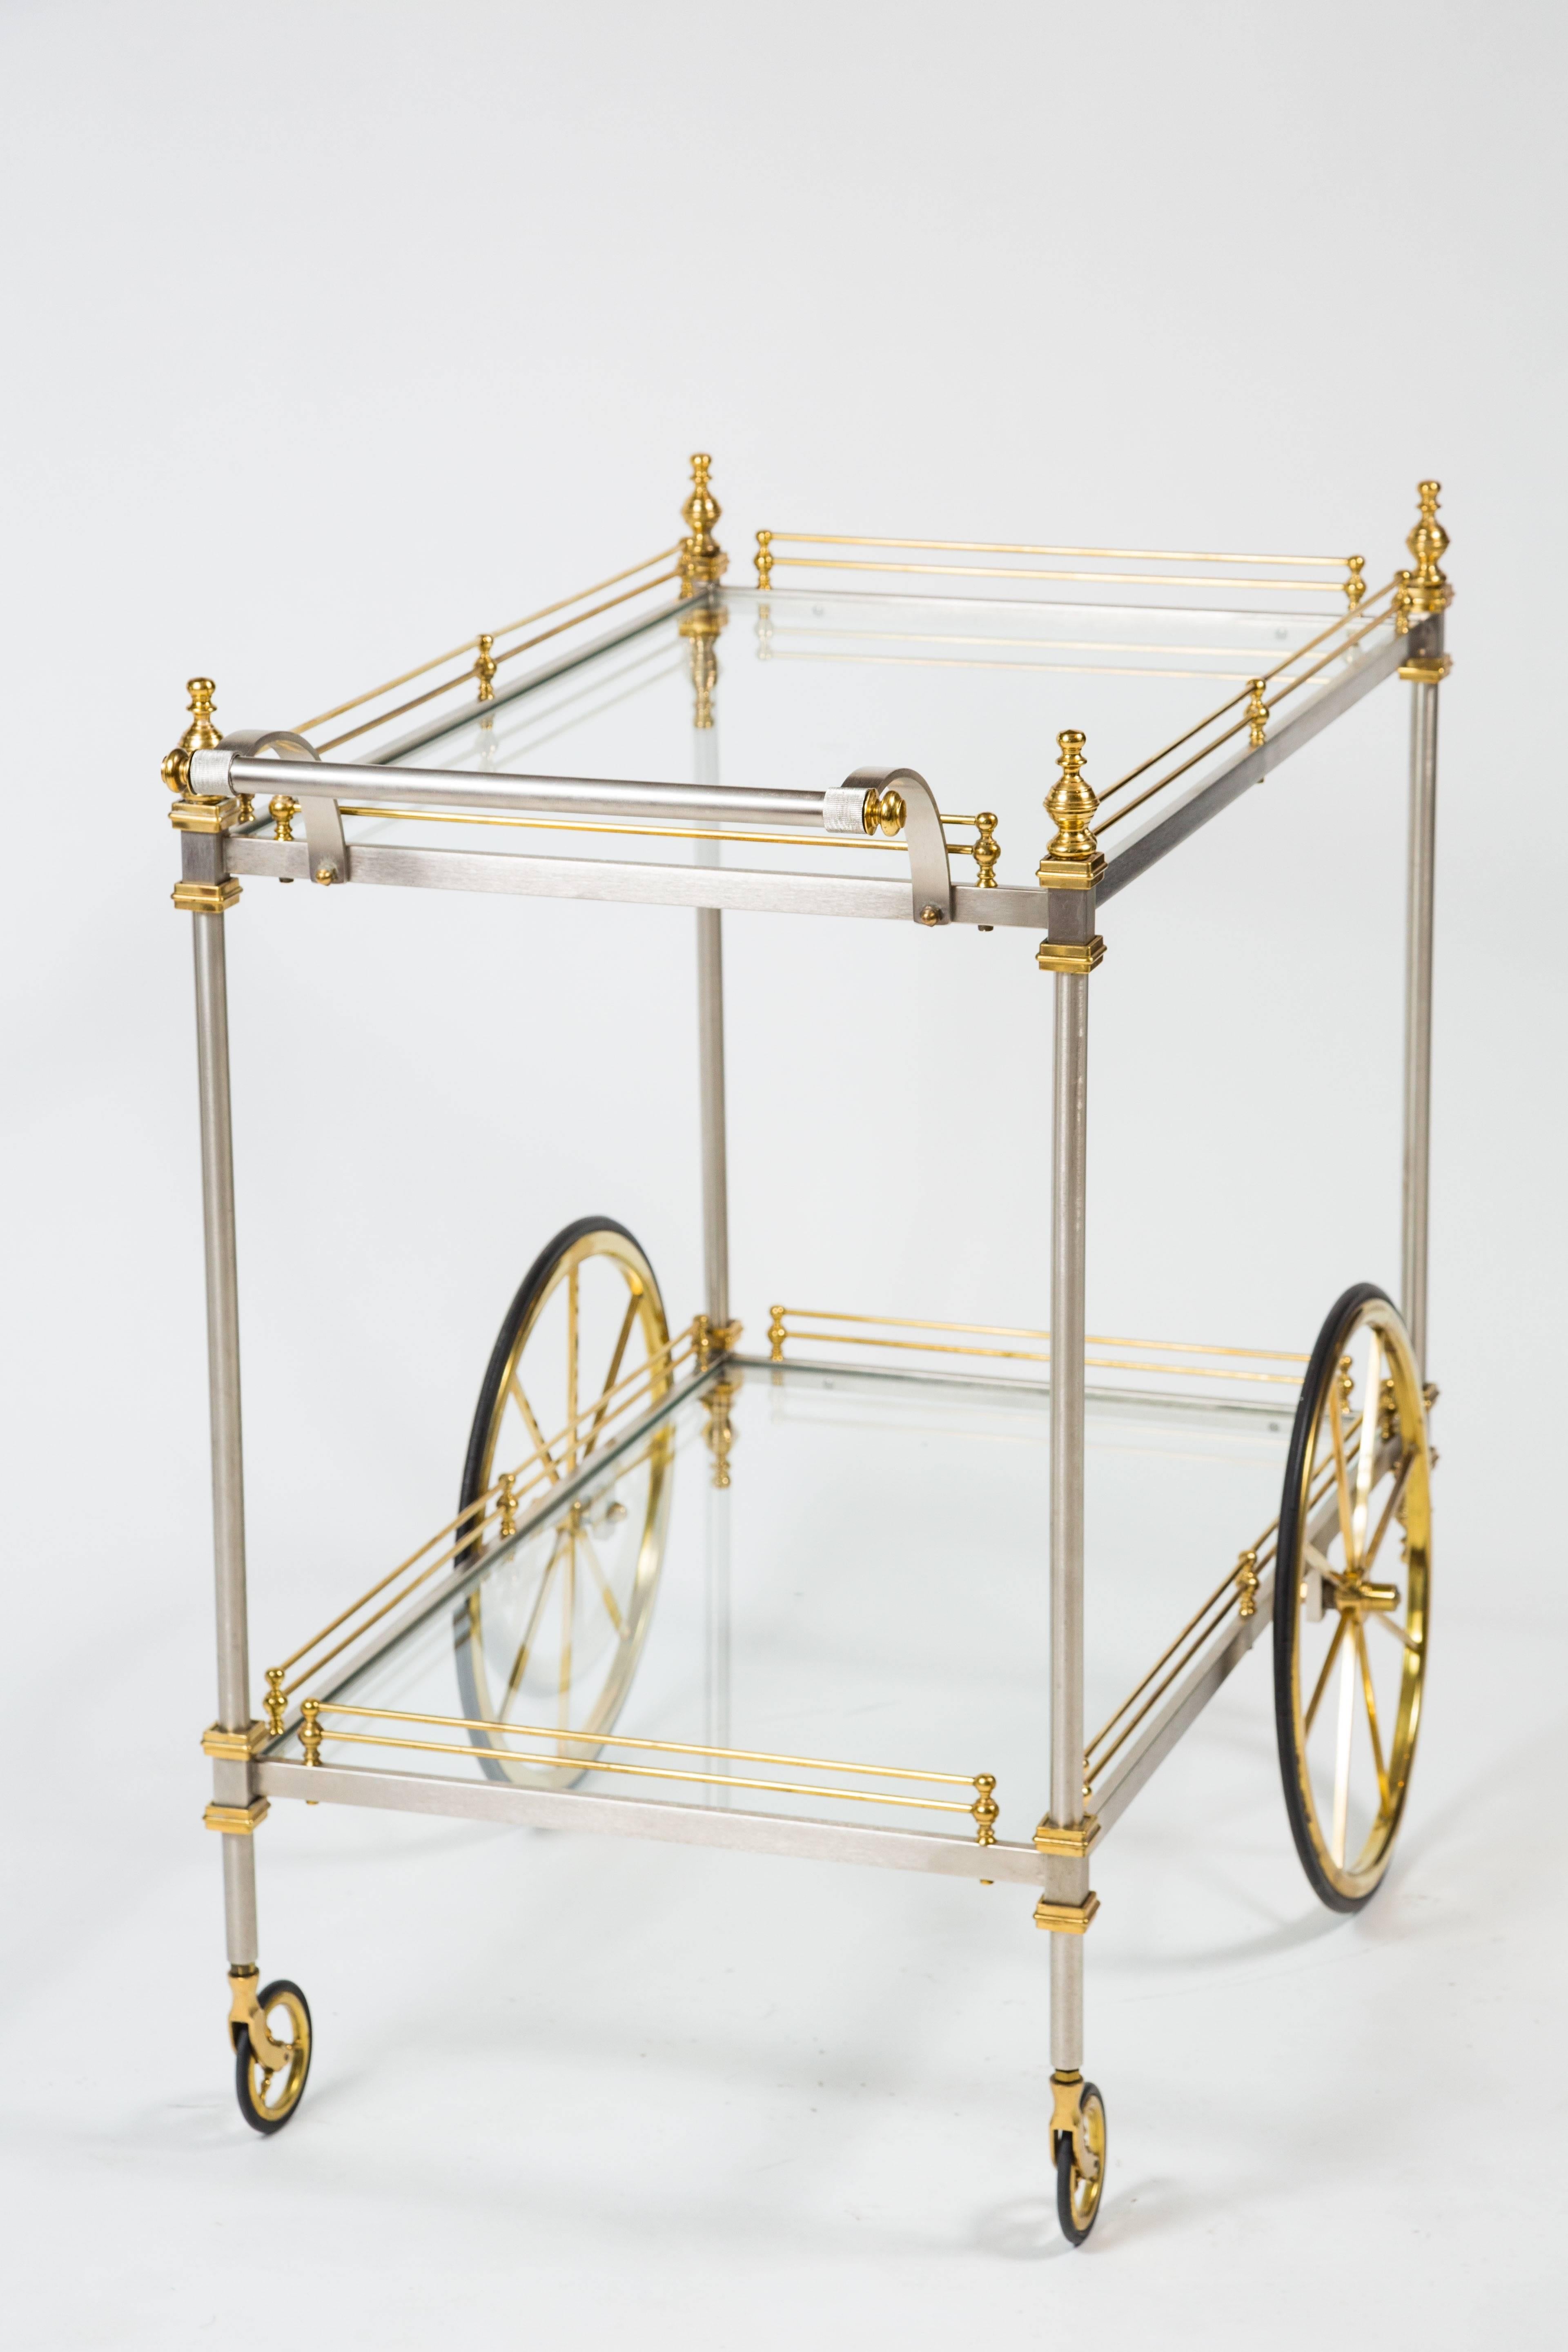 American Chic Metal and Brass Tiered Drinks Trolley